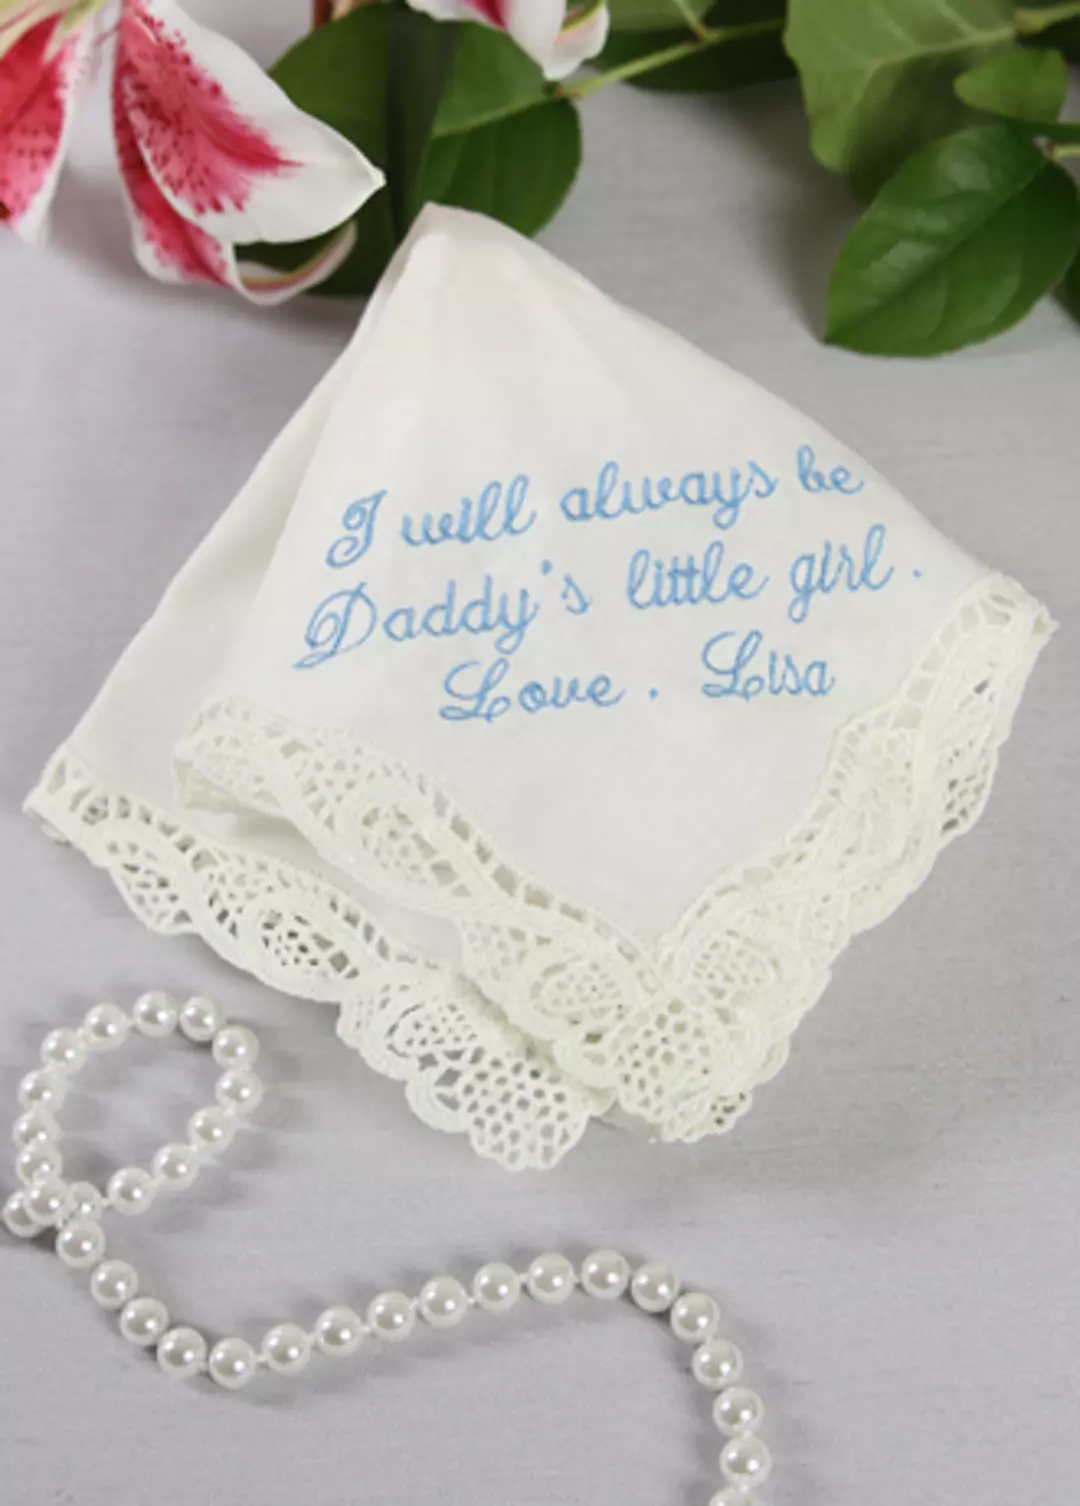 Personalized Handkerchief Daddy's Little Girl Poem Image